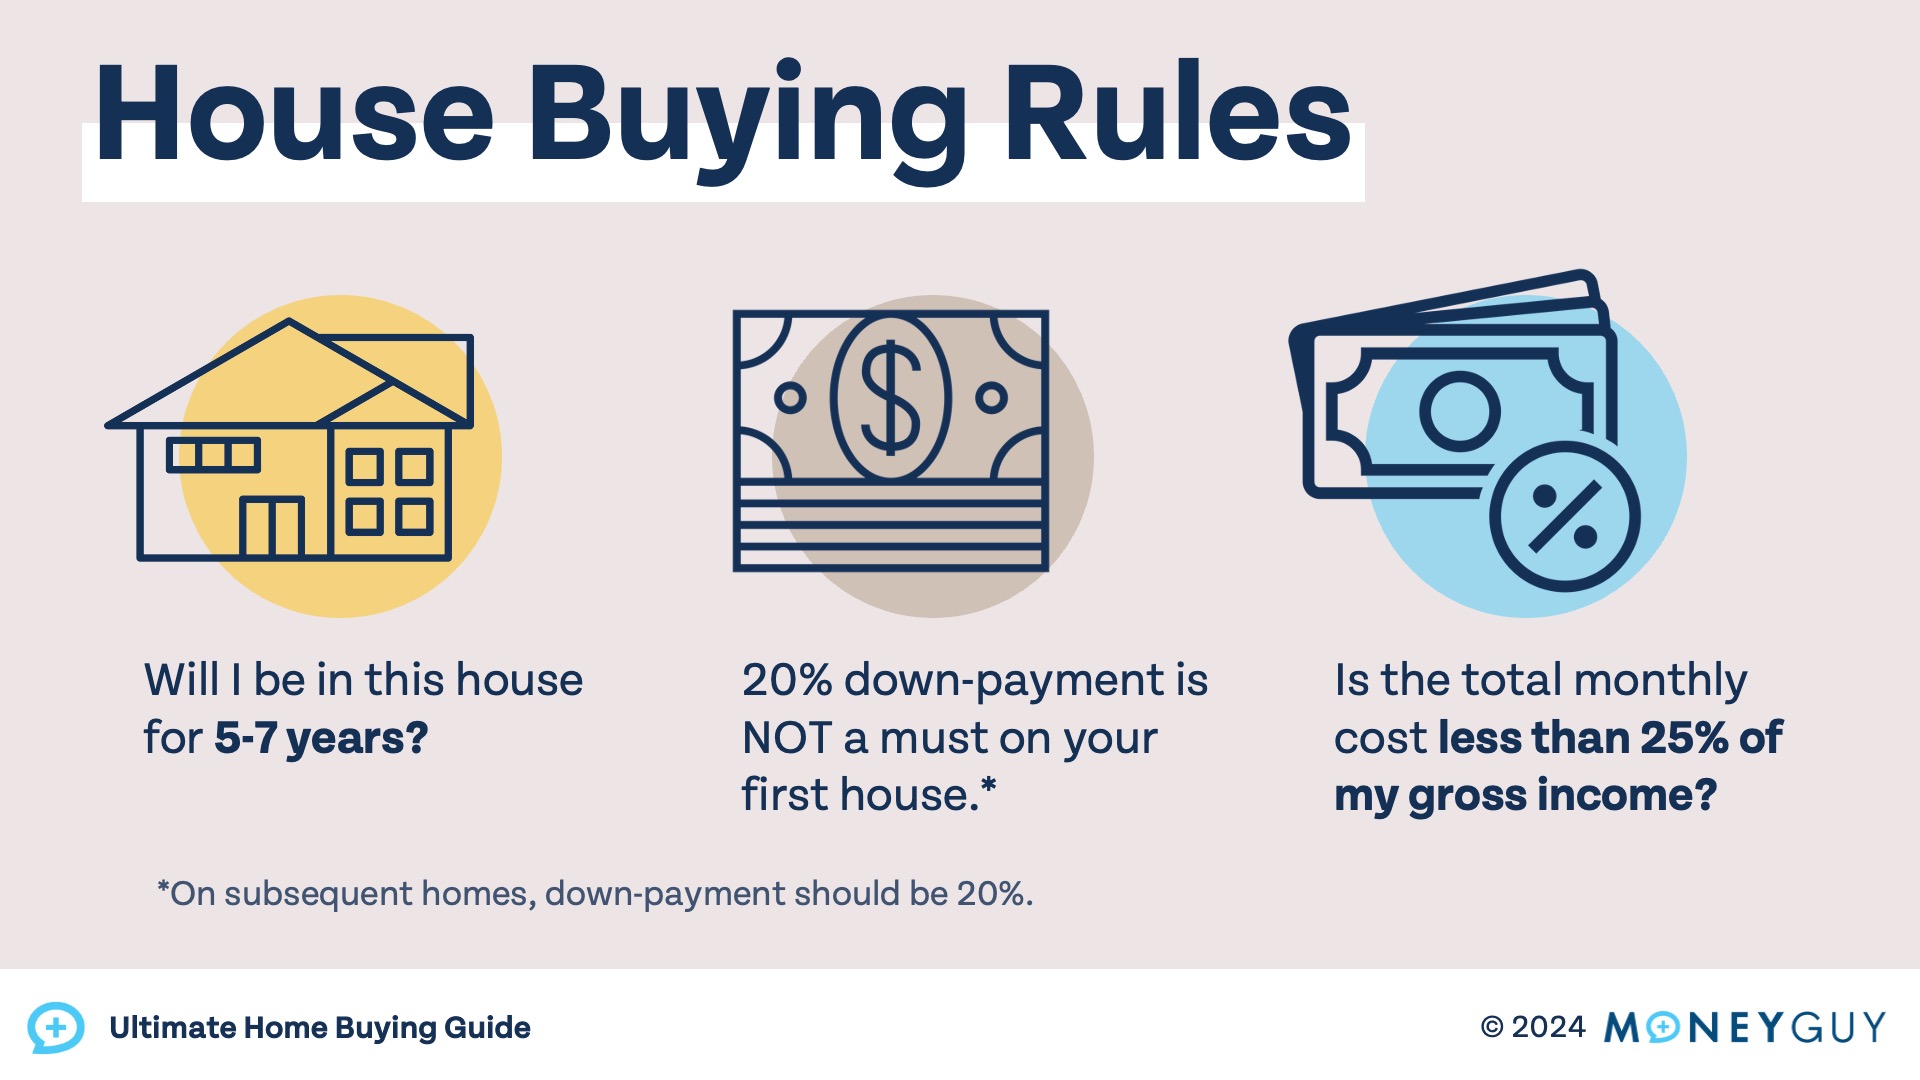 Money Guy's got three important rules for buying a house: 1) Will you be in the house for 5-7 years? 2) 20% down-payment is not necessary for your first house. 3) Will the total monthly cost be less than 25% of your gross income?